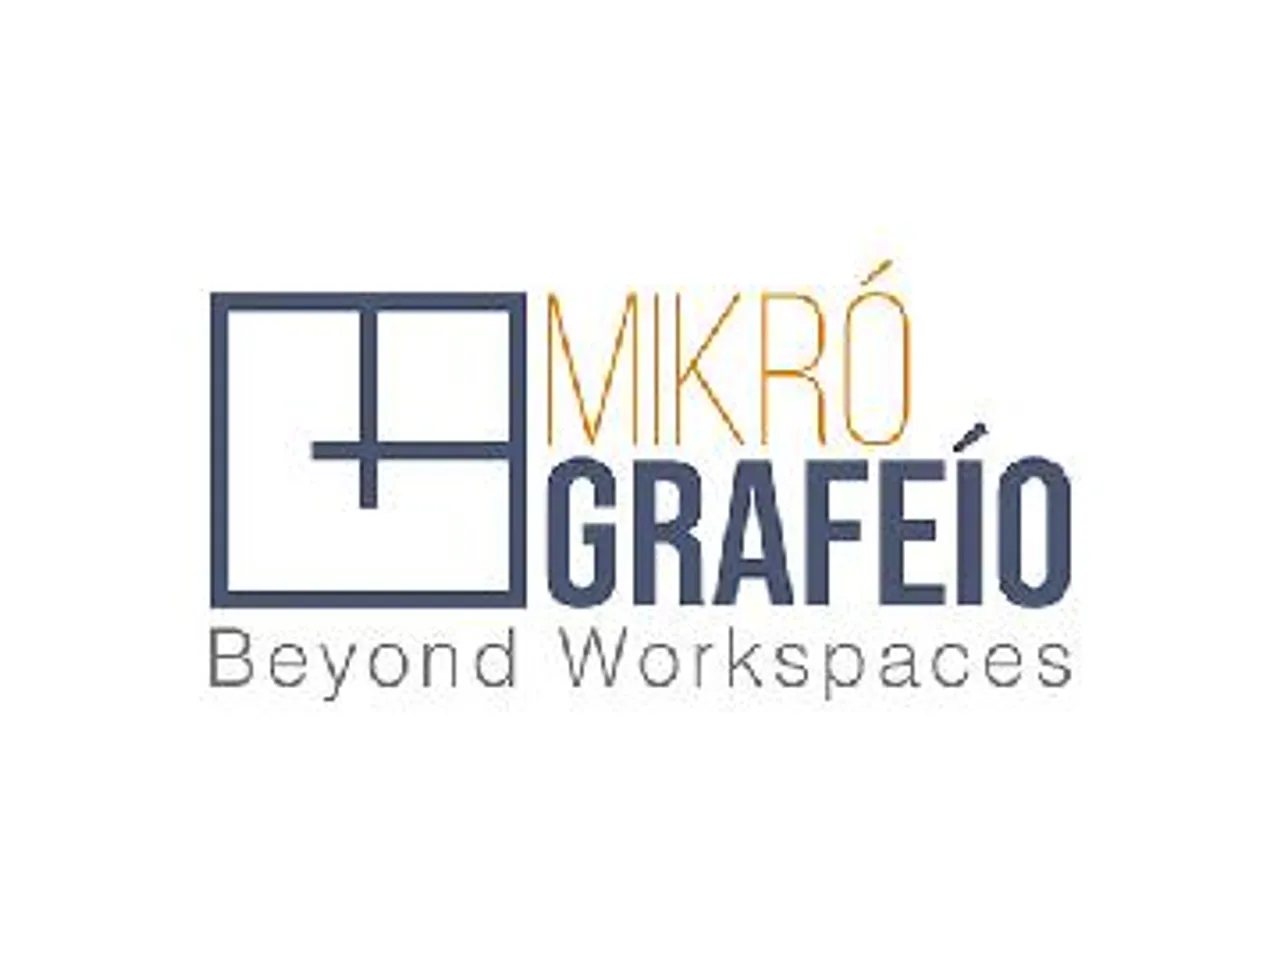 Mikro Grafeio Now Extends Its Presence with Five New Centres in South India, More Innovative Workspace Solutions to Follow